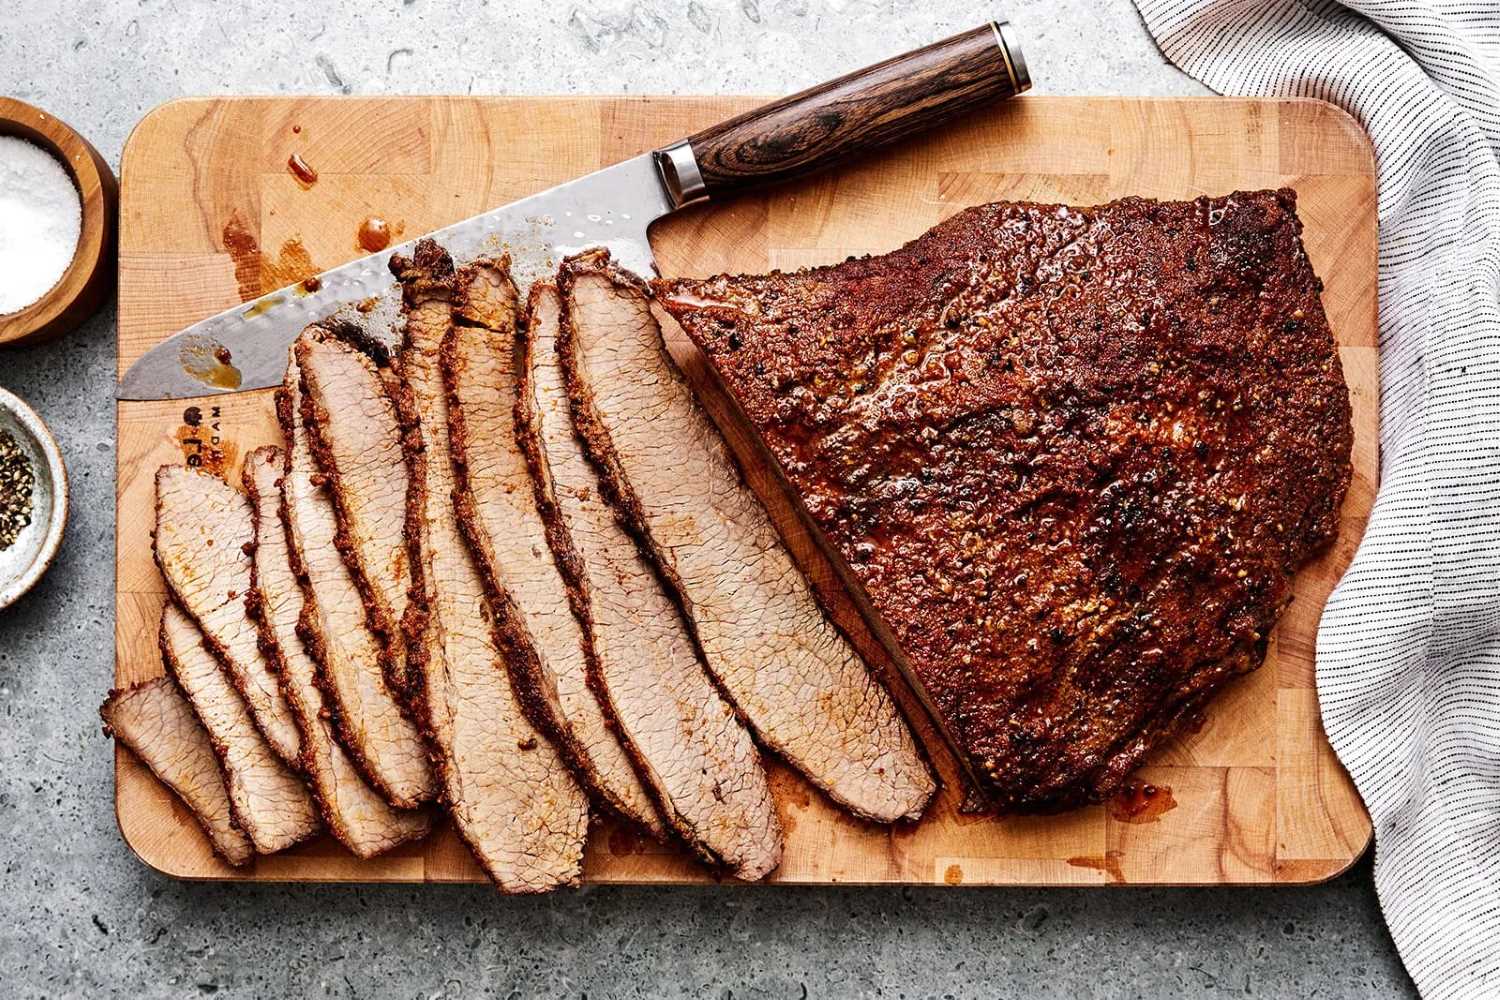 11-facts-about-national-brisket-day-may-28th